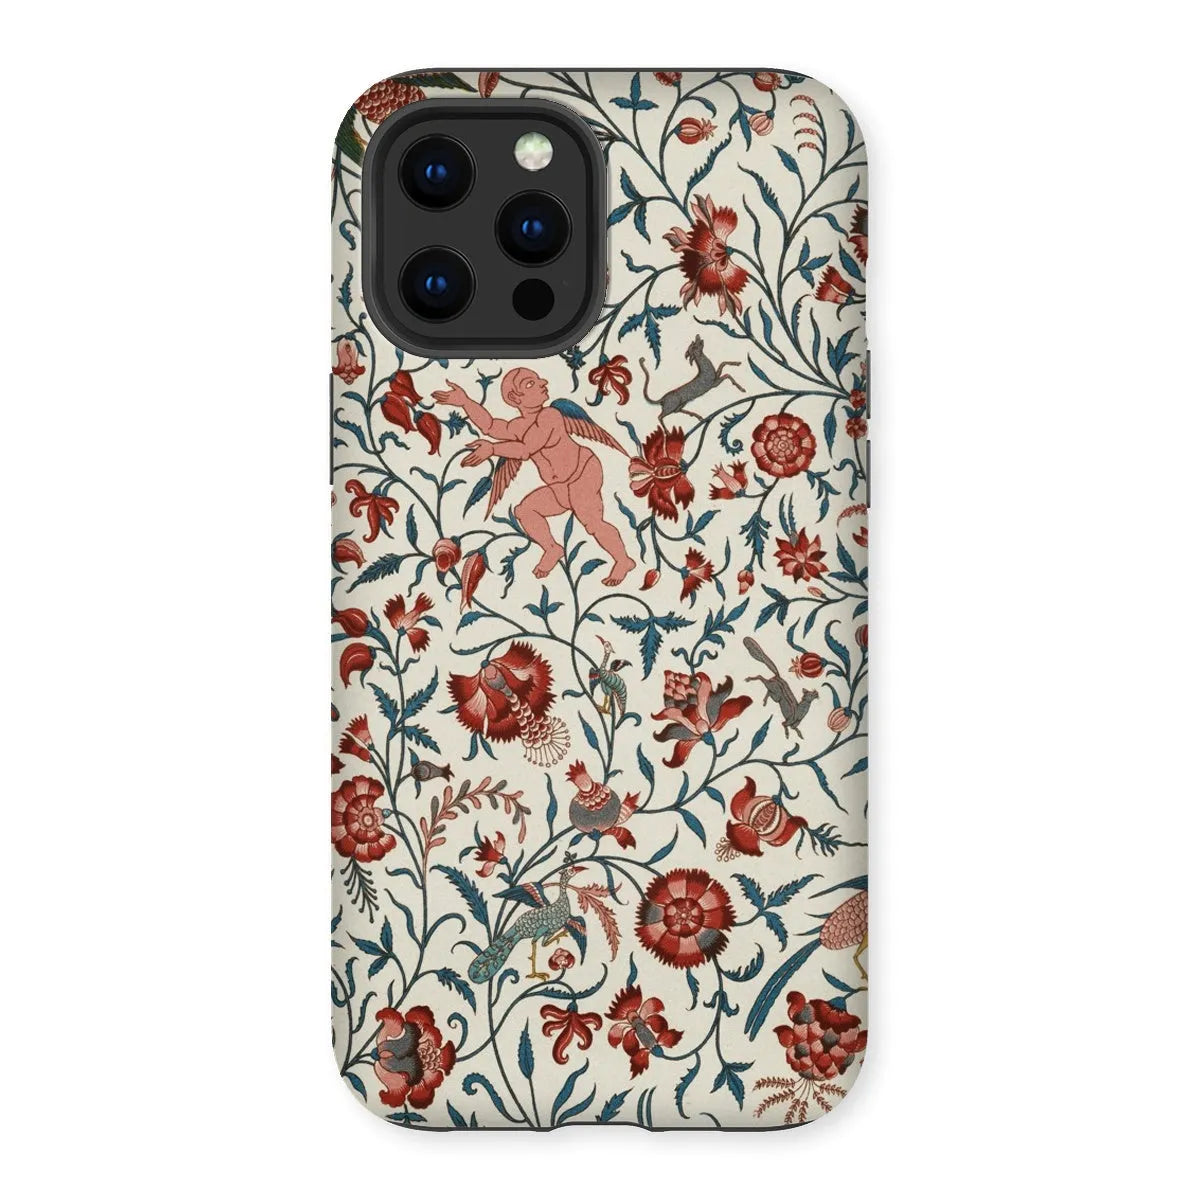 Persian Pattern From L’ornement Polychrome By Auguste Racinet Tough Phone Case - Iphone 12 Pro Max / Matte - Mobile